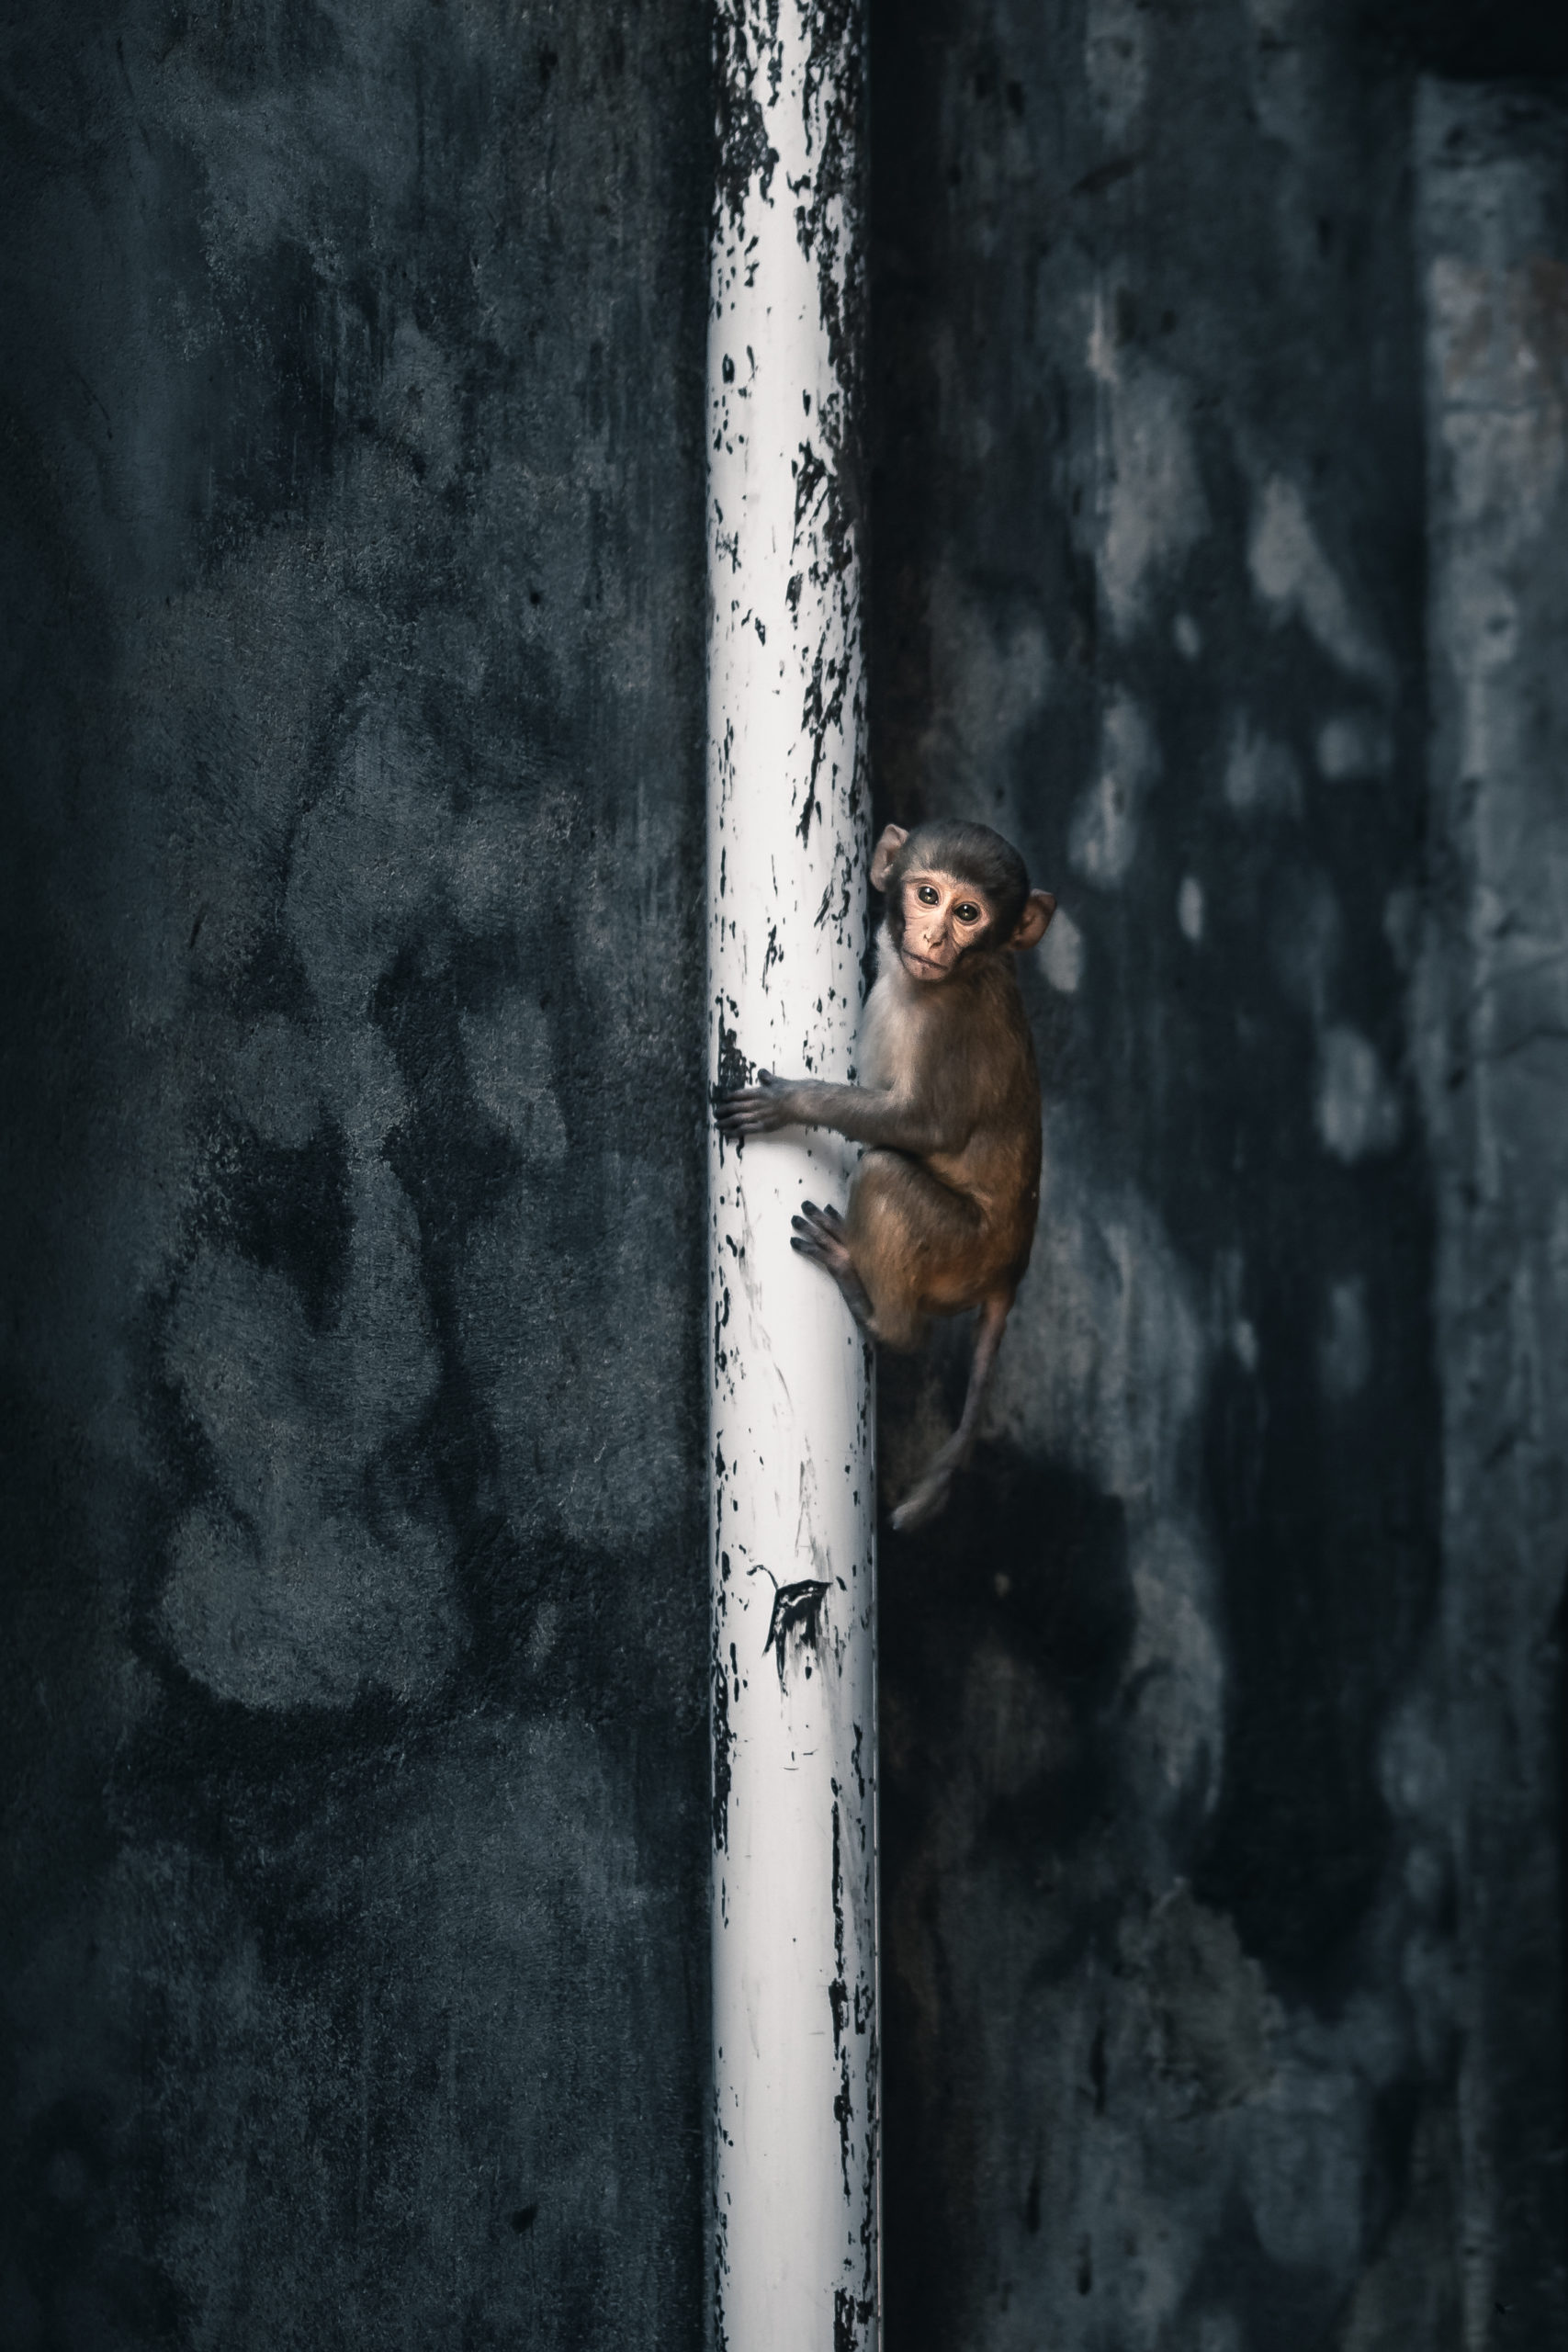 street photography of a monkey climbing a pipe in the streets of Mathura, India